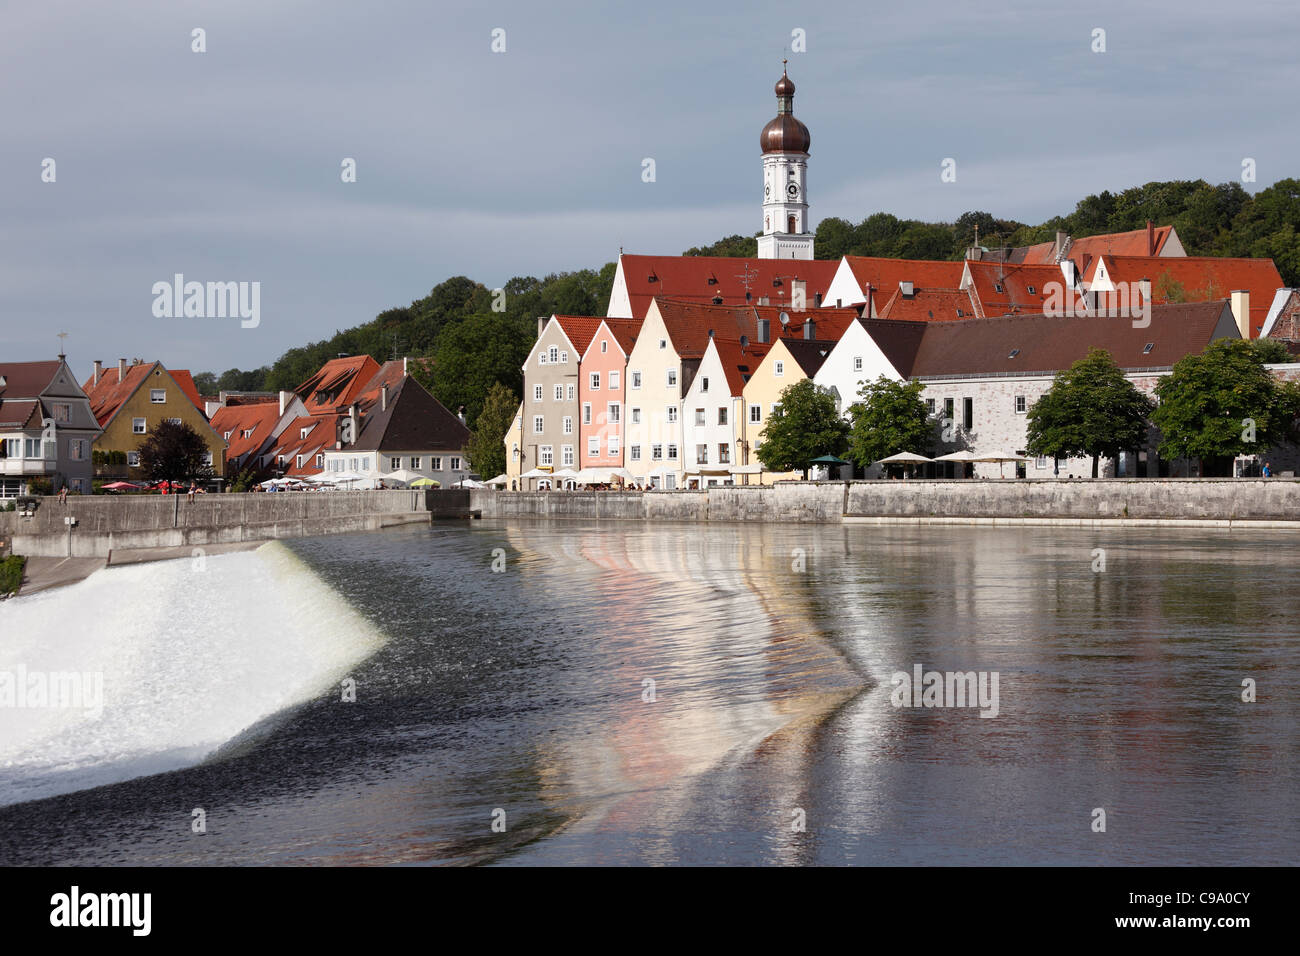 Germany, Bavaria, Upper Bavaria, Landsberg am Lech, View of Lech river in front of town Stock Photo